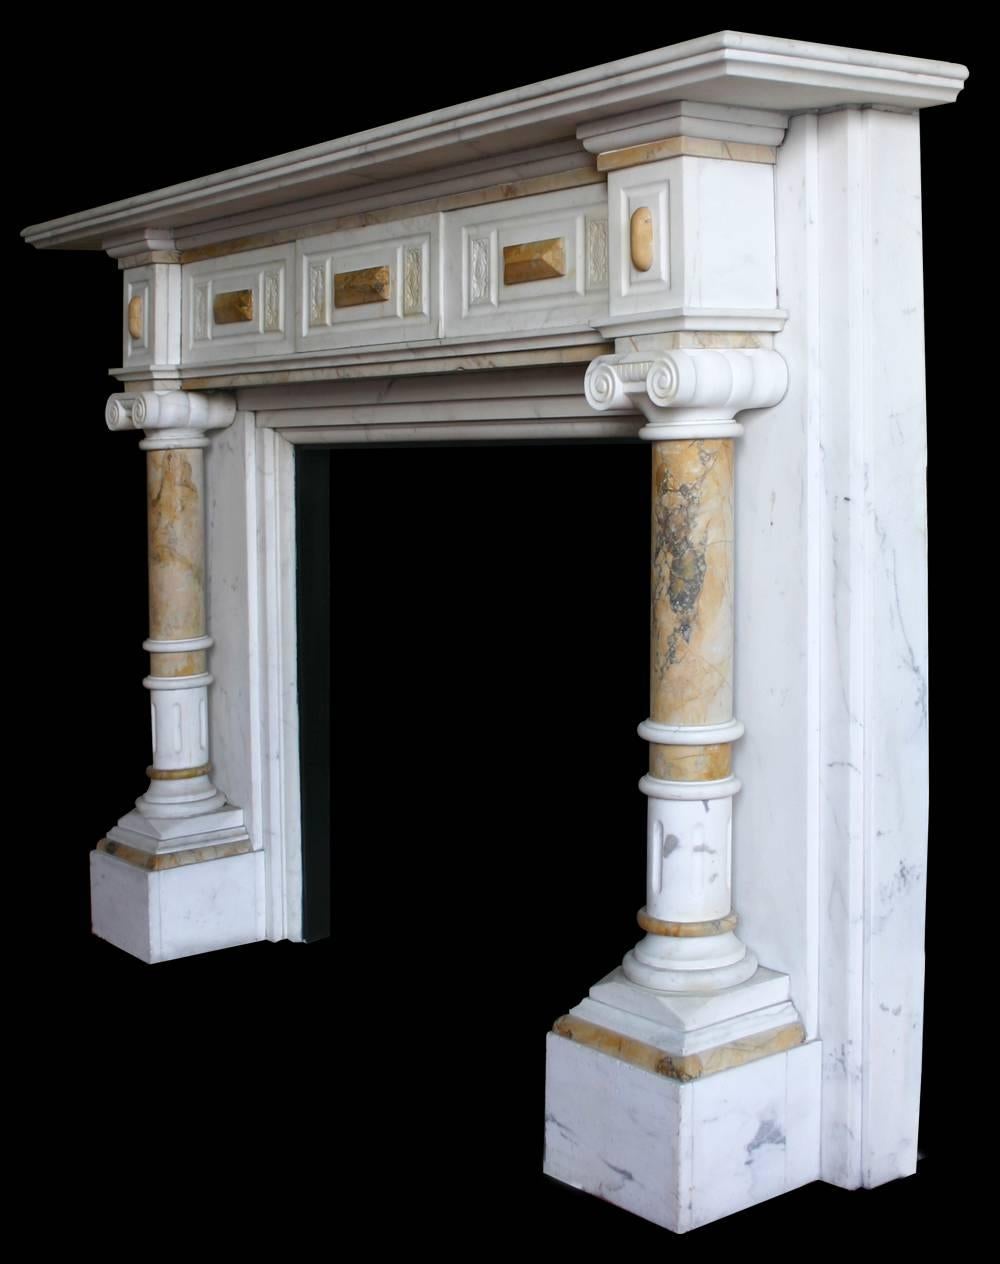 Very imposing antique late Victorian statuary white marble fire surround with Sienna marble pillars supporting square capitals and a frieze decorated with sienna marble lozenges and carved panels,

circa 1880.

Images prior to restoration. When